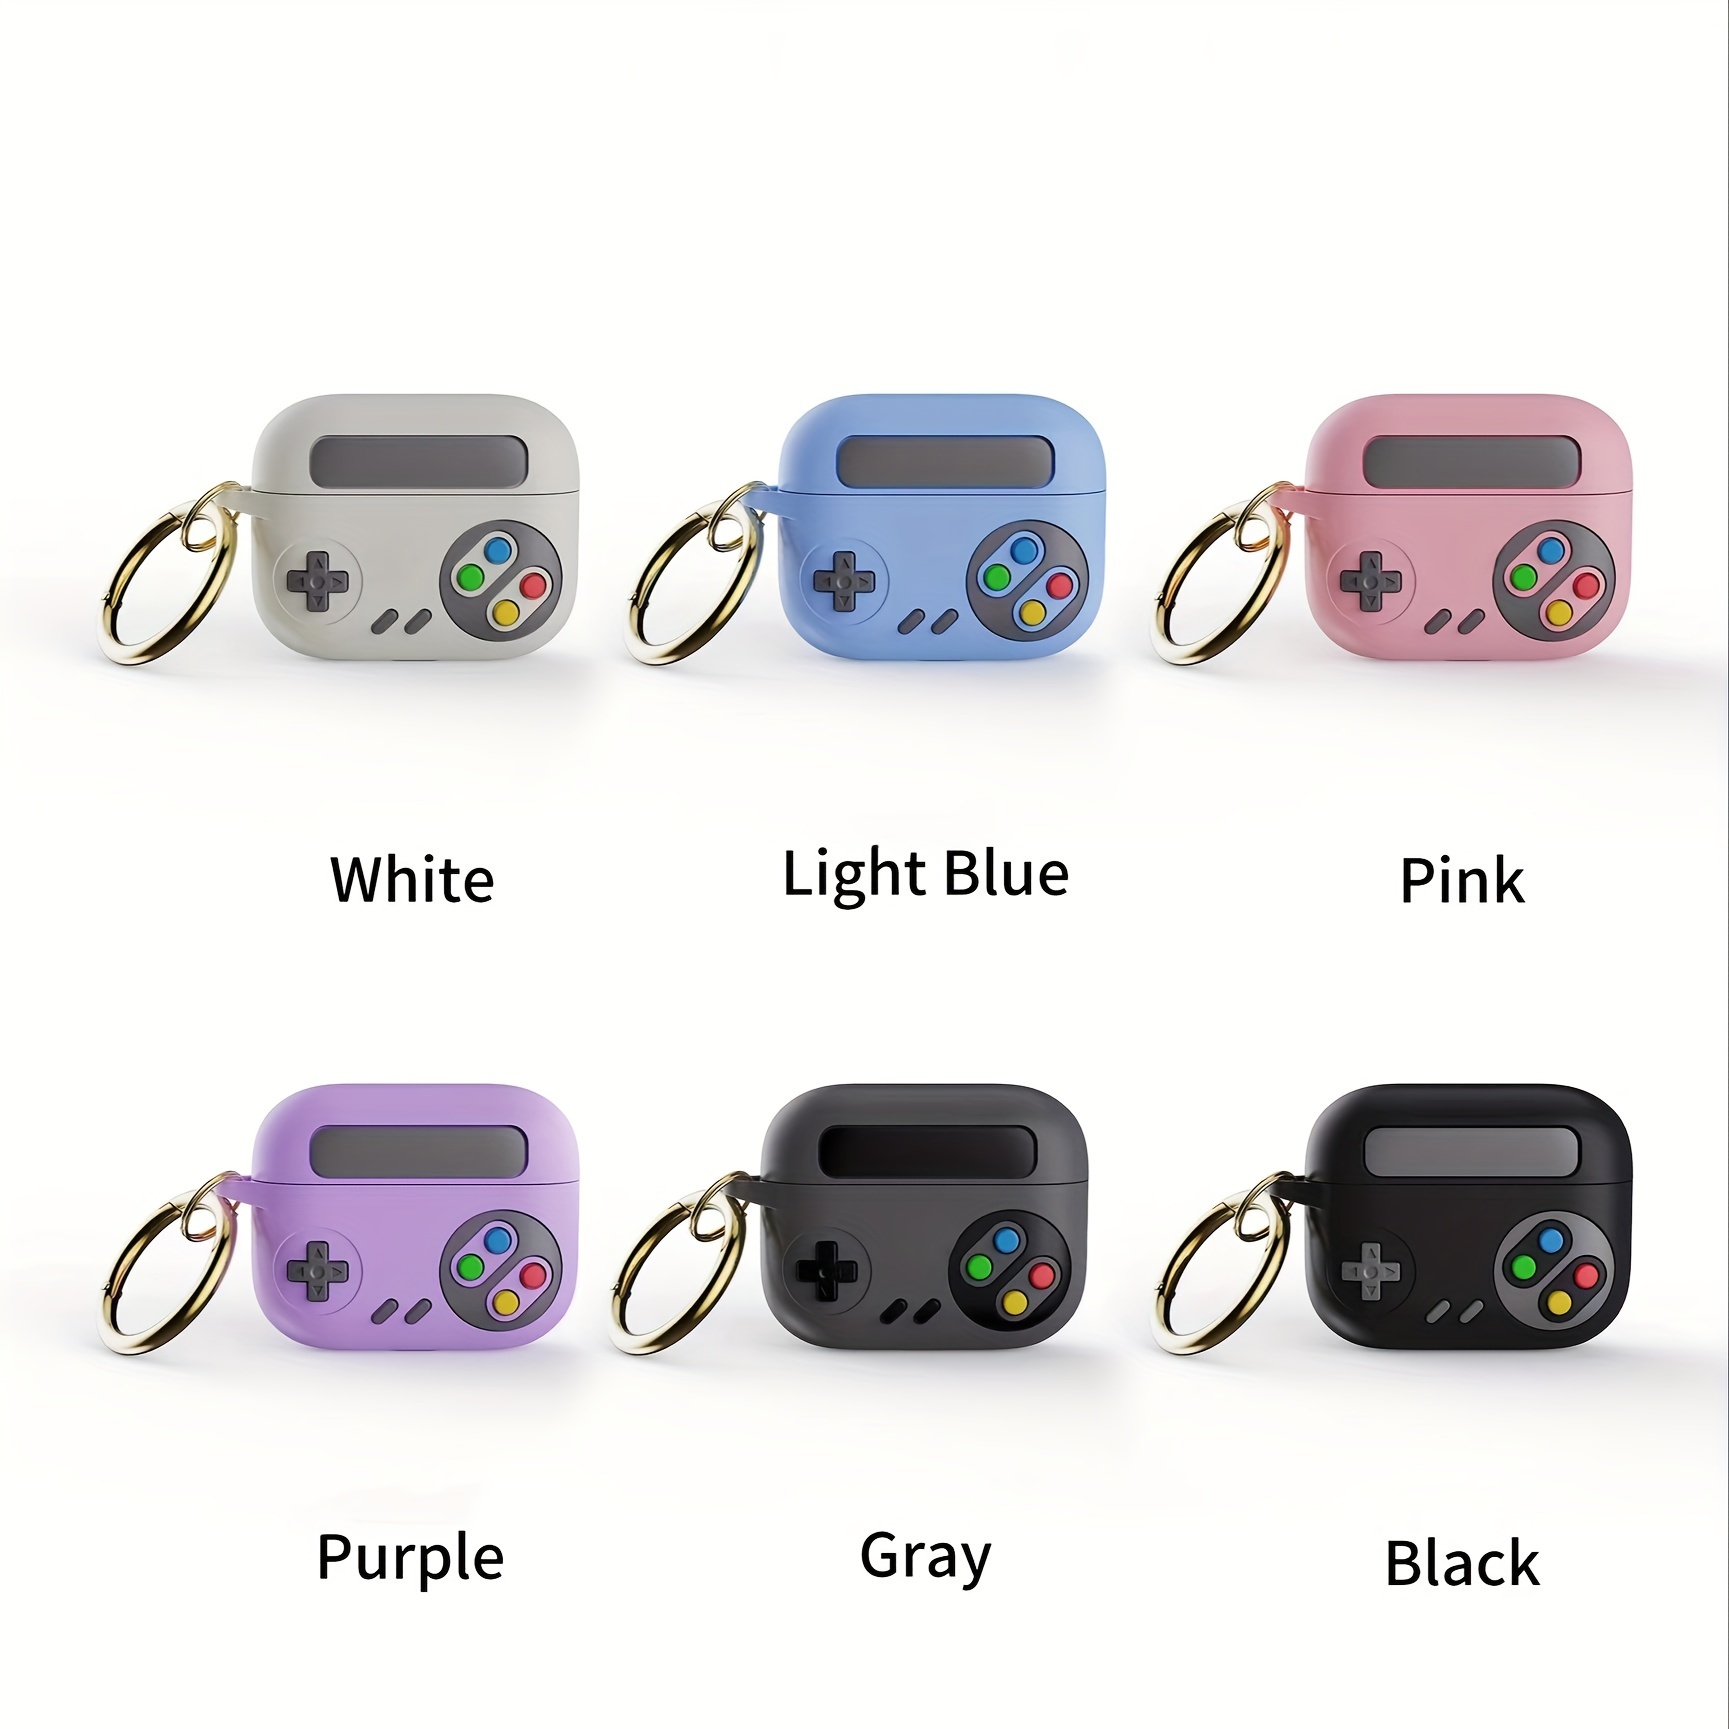 

Retro Gamepad Silicone Case For Airpods 1/2/3/pro/pro2 - Protective Earphone Cover With Easy Access Design, Cute Gift Idea